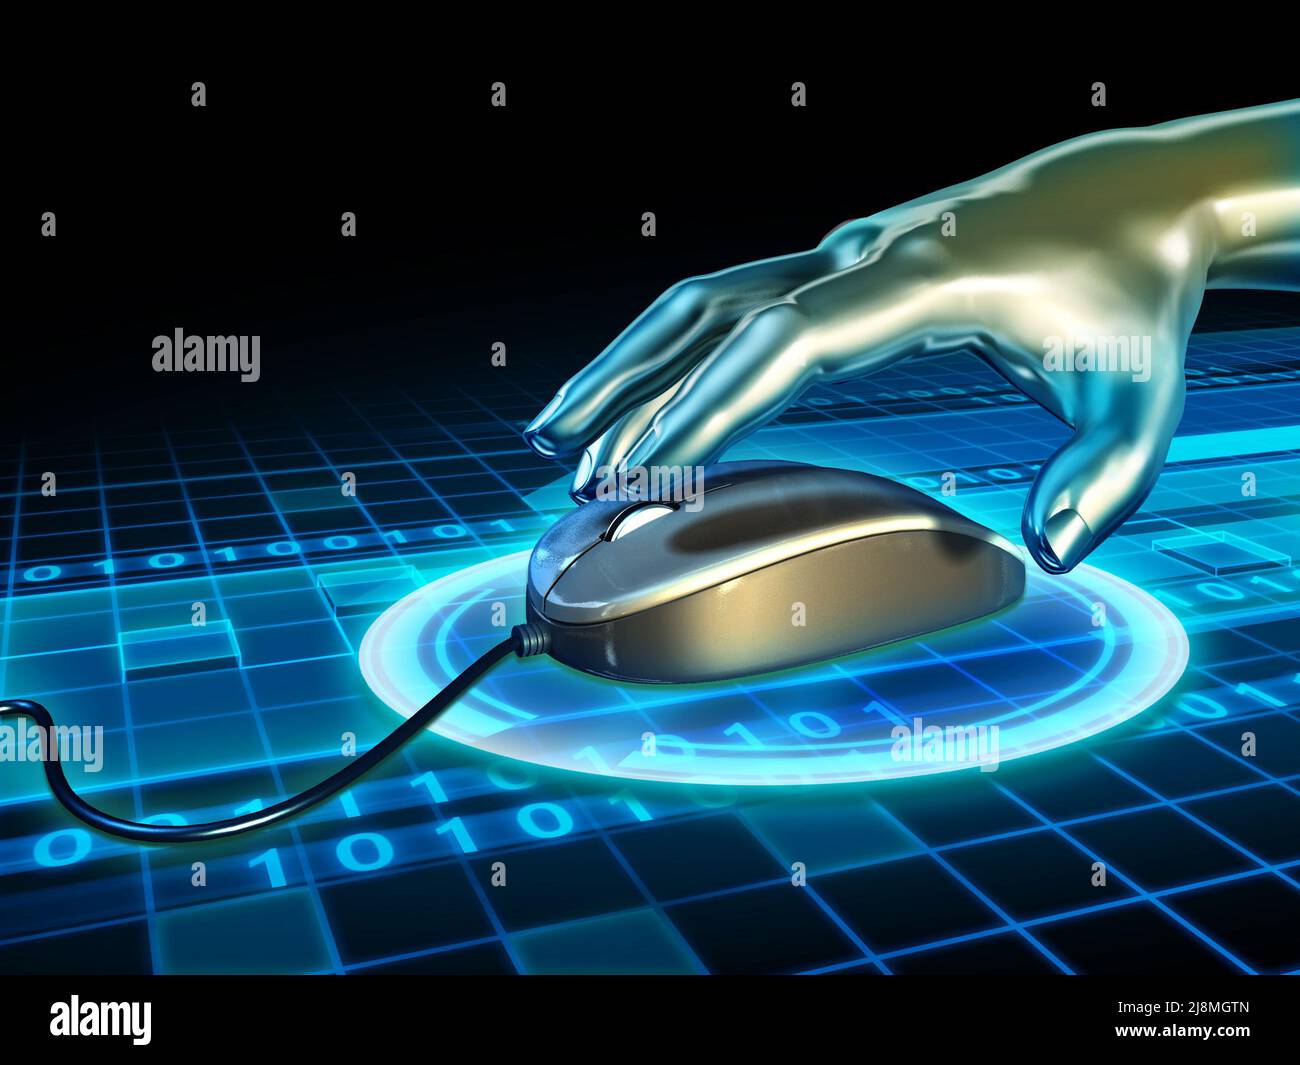 Android hand grabbing a mouse in cyberspace. Digital illustration. Stock Photo